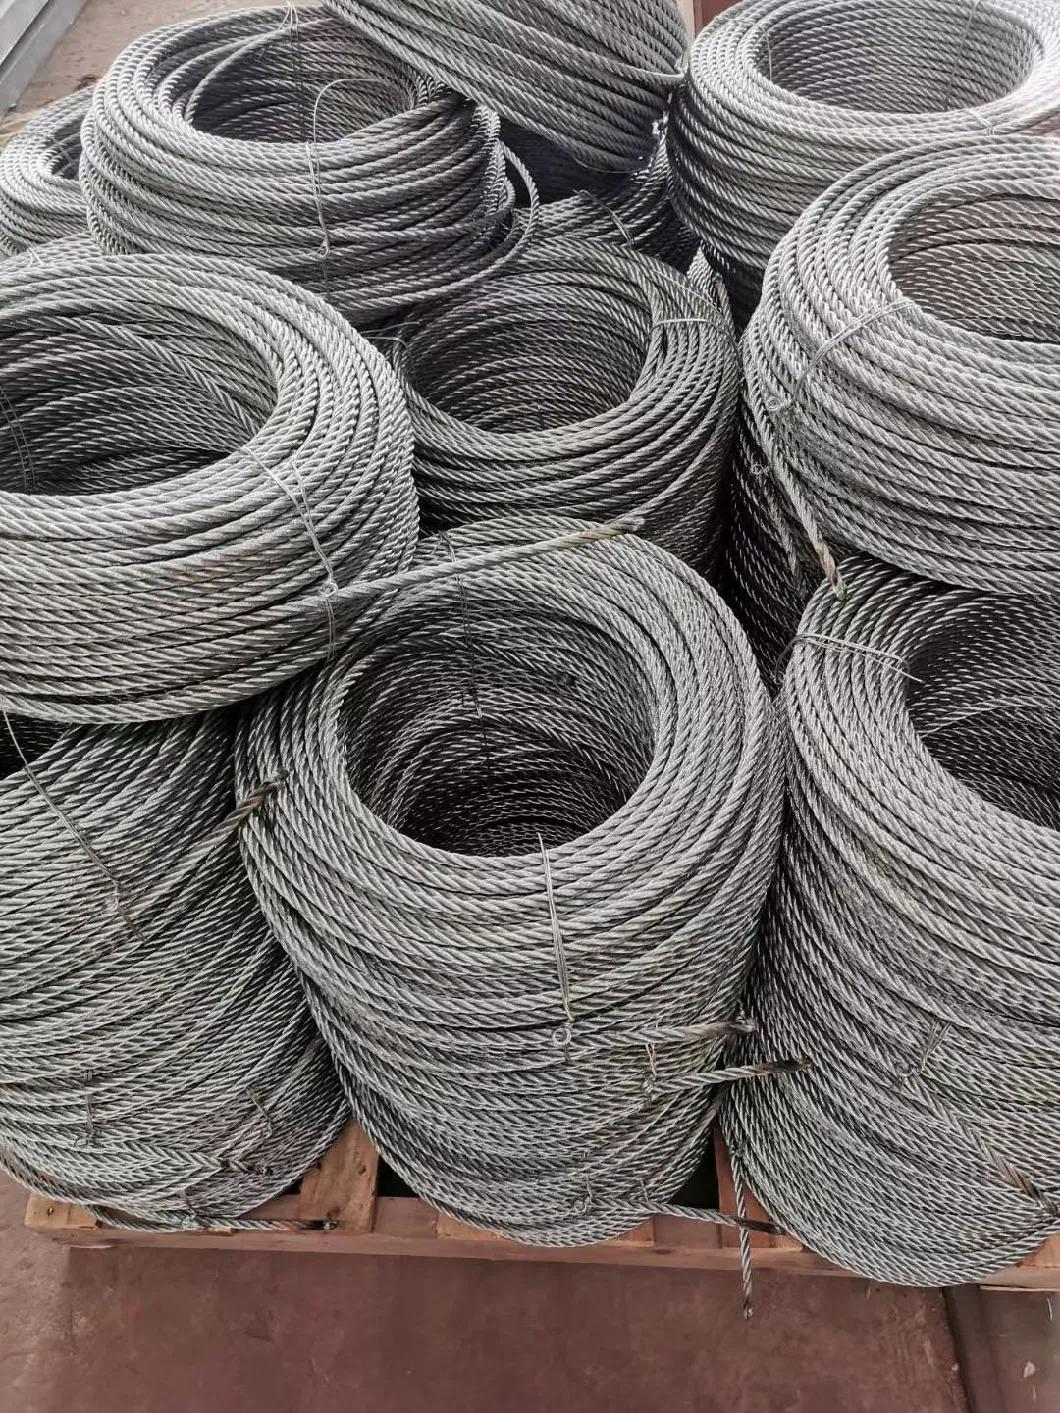 Gondola Rope Cradle Rope 4X31ws+Ppc/4*31 Galvanized Steel Wire Rope 8.6mm 8.3mm 9.6mm 10mm for Suspended Platform 1960MPa 2160MPa